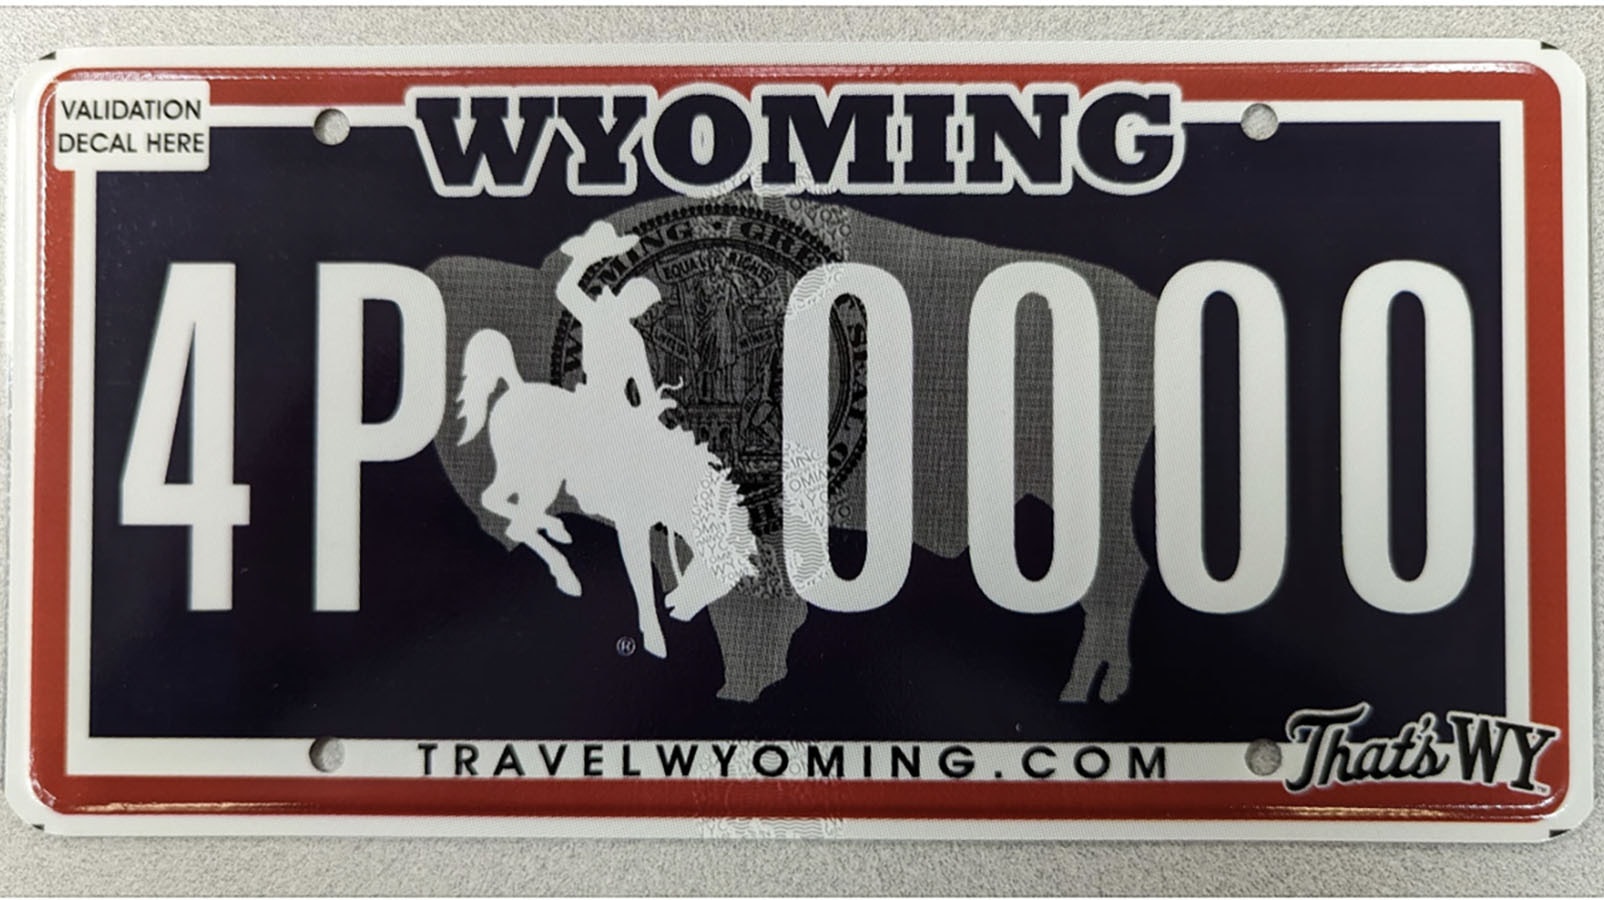 New license plate 10 28 22